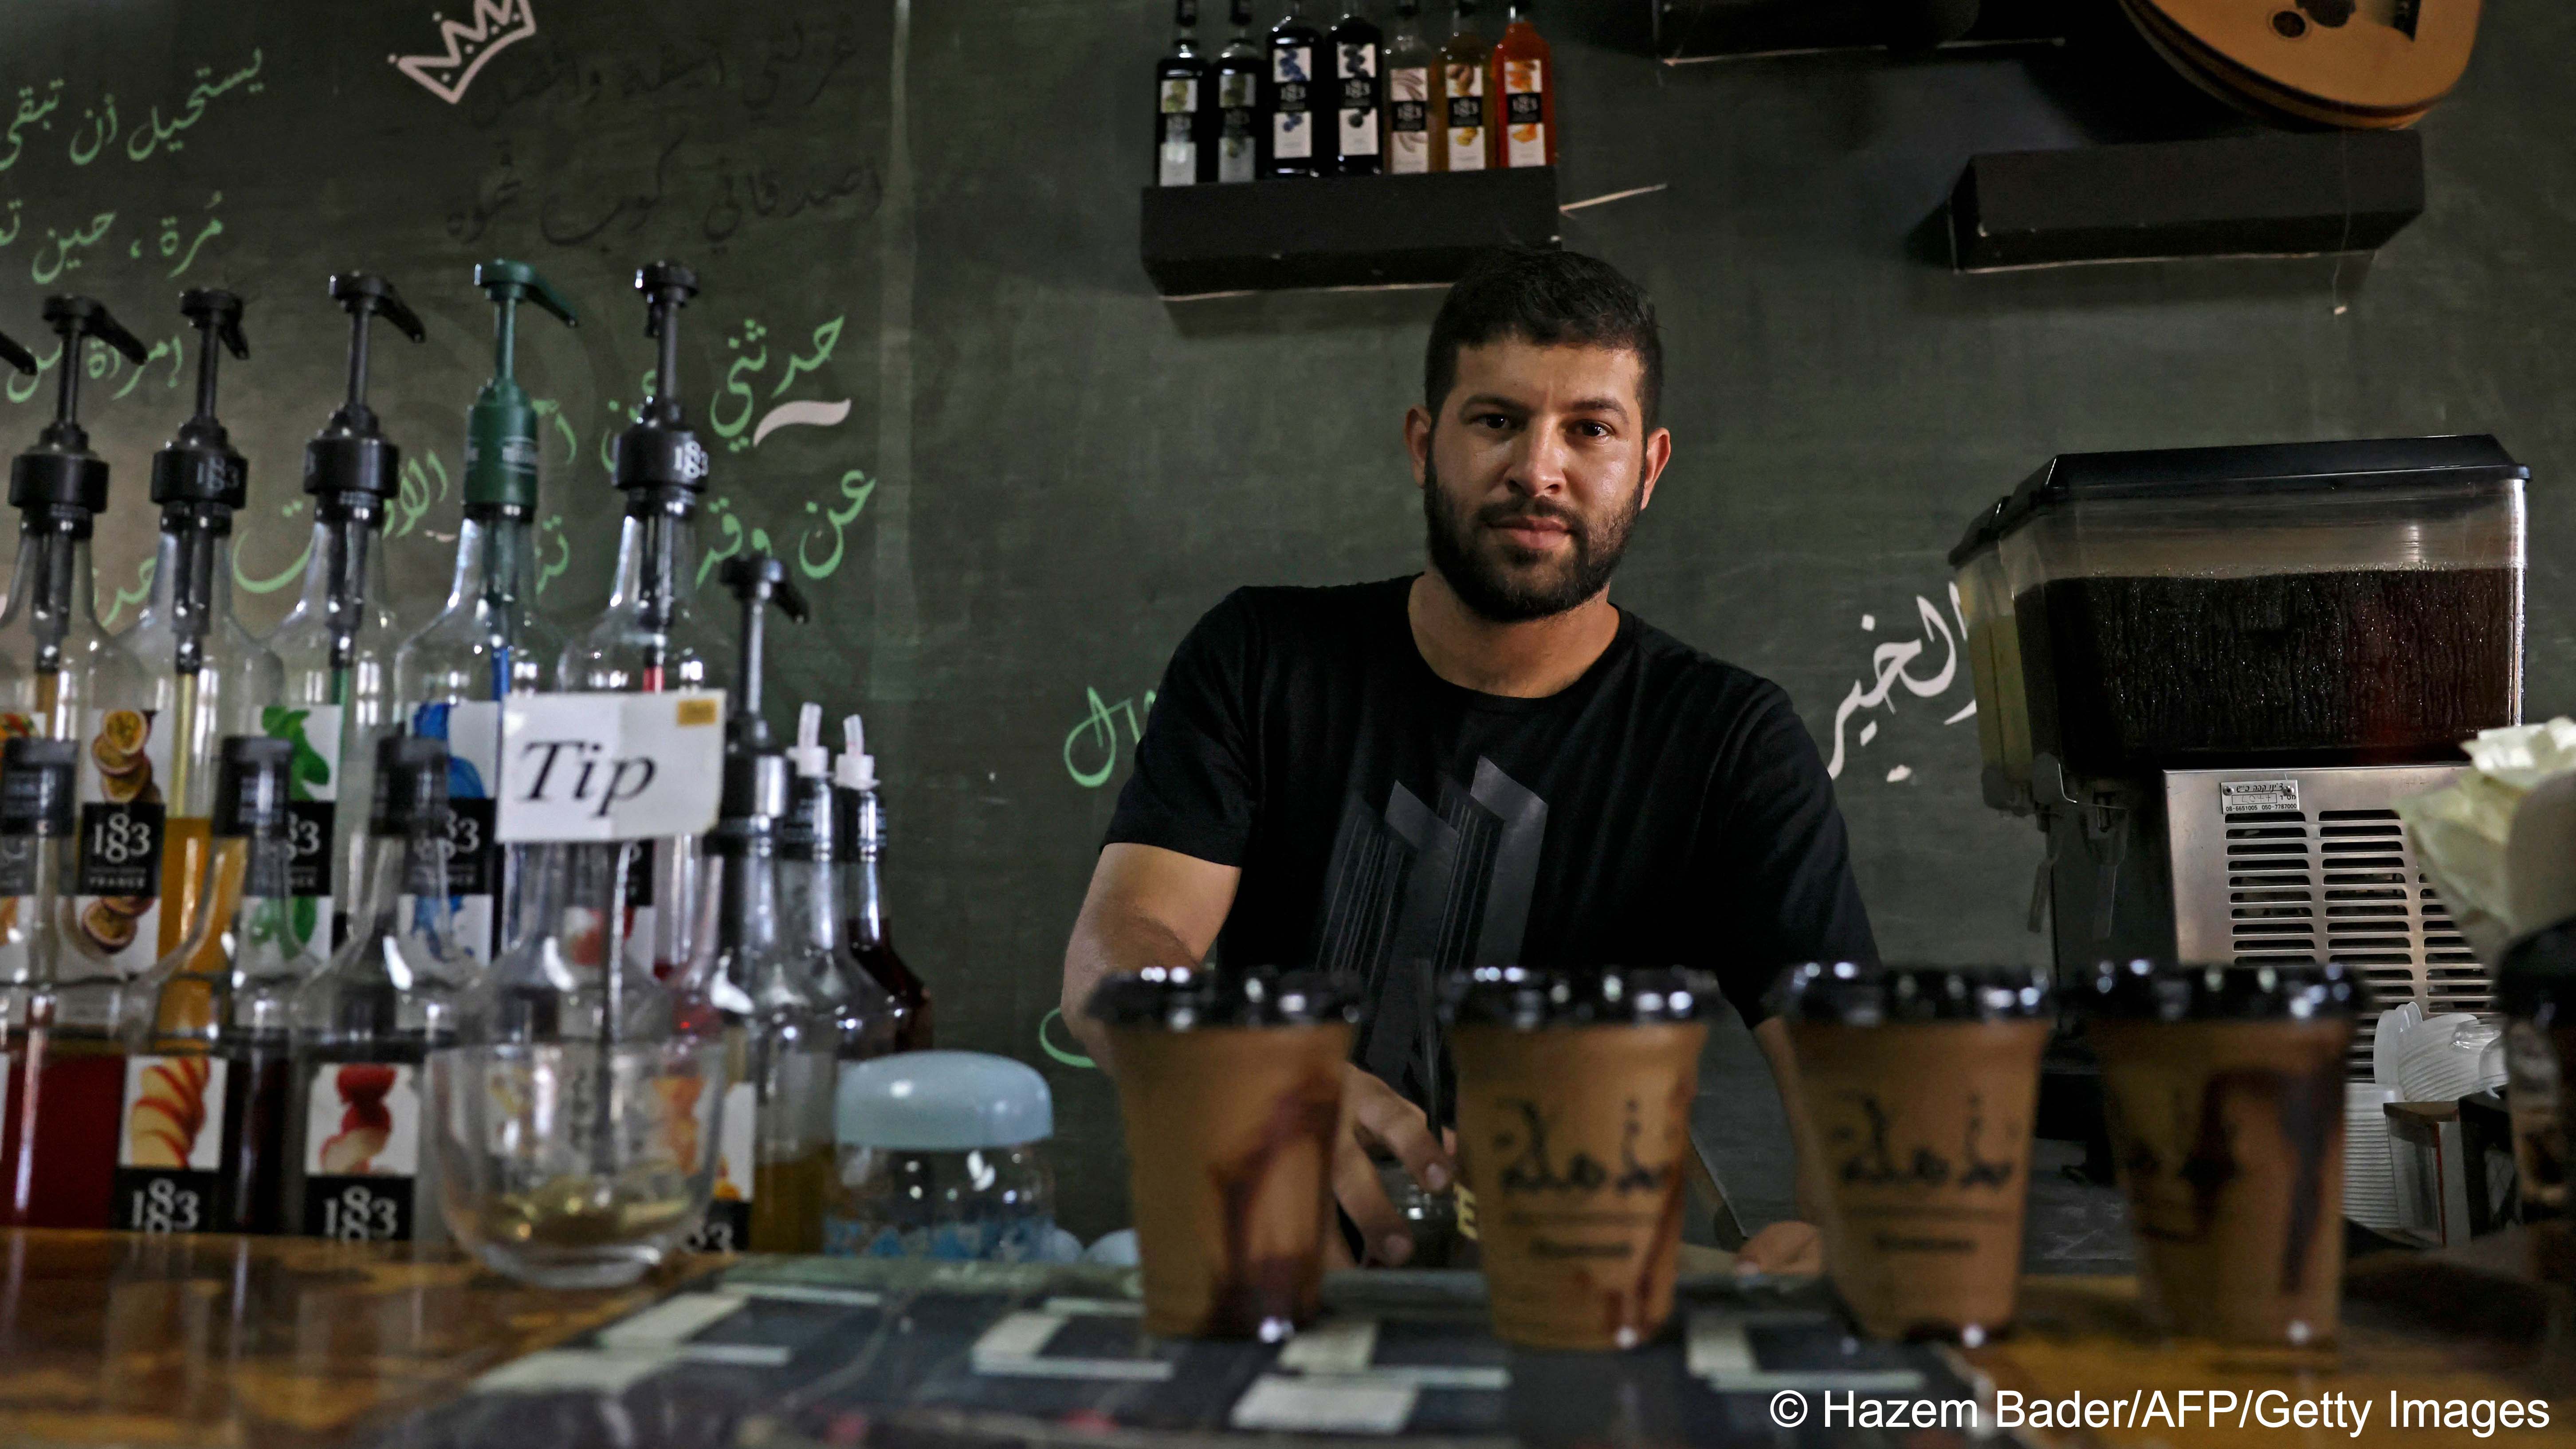 A man stands behind a bar with bottles and coffee beakers (photo: HAZEM BADER/AFP) 